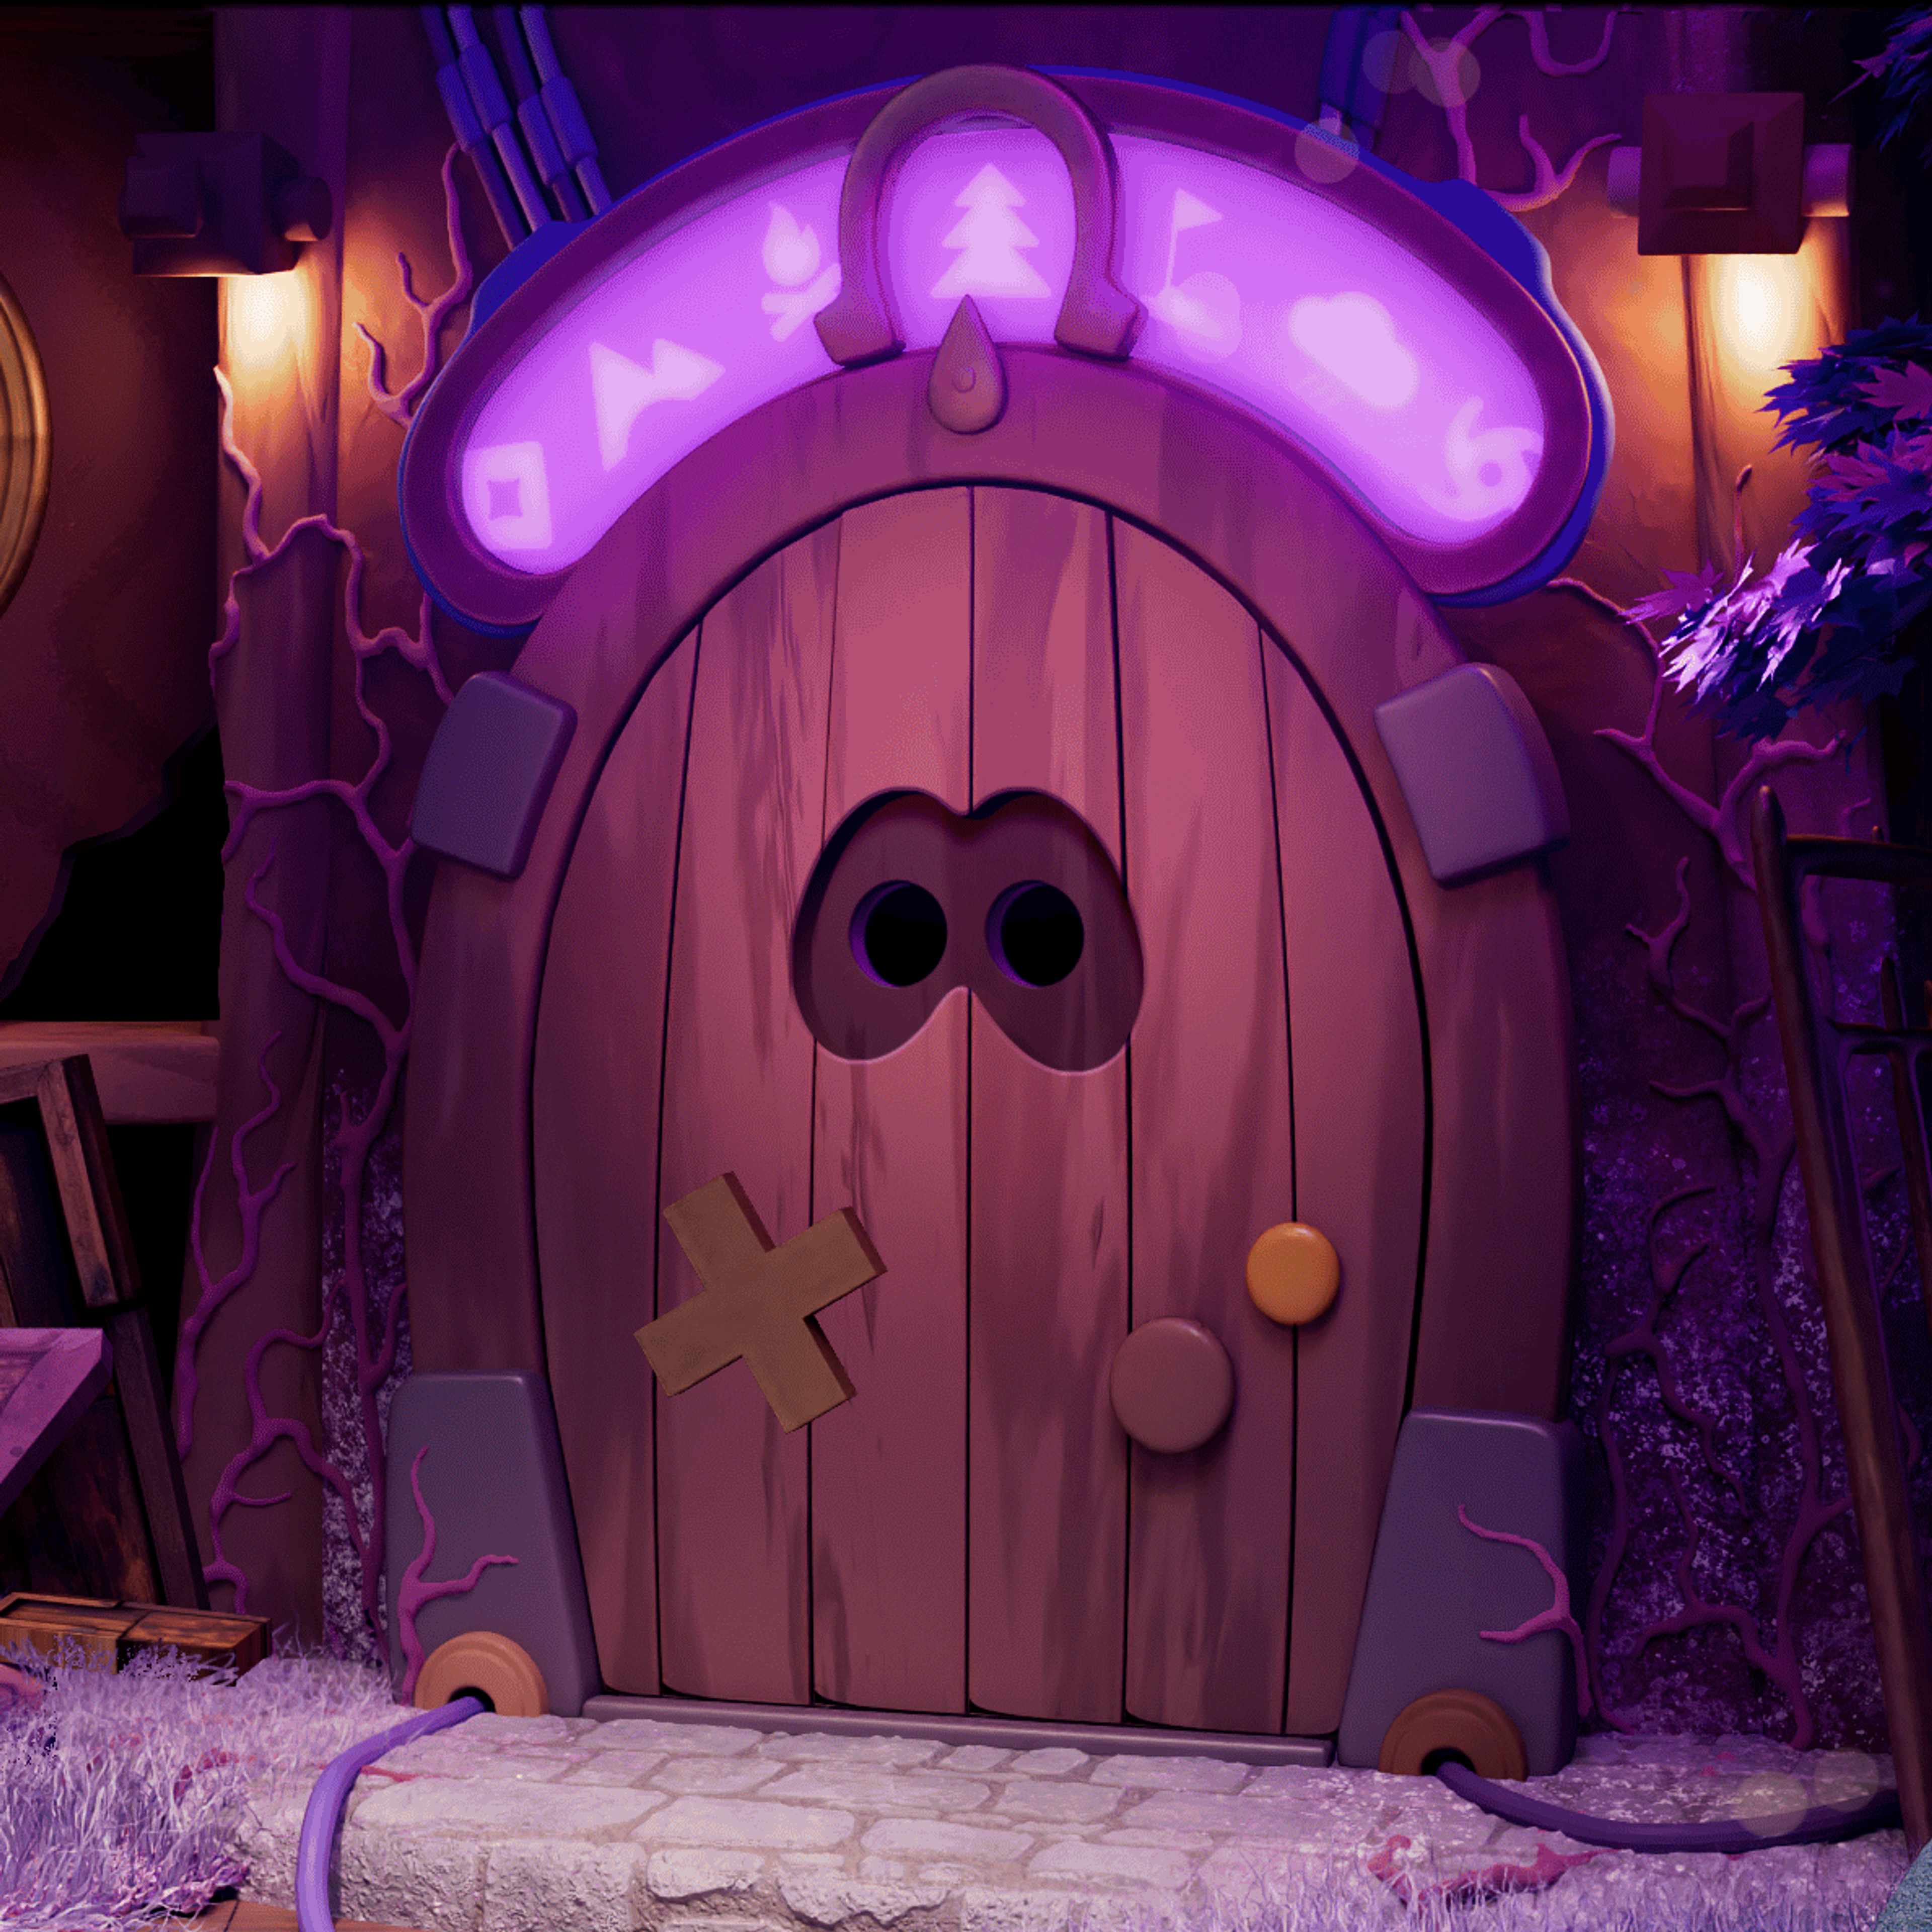 A brown wooden door with knobs and handles, with a goggle-shaped cutout and a glowing purple icon dial above it. The door leads to a Portal, through which Keepsy can enter the worlds of the games Little Nook publishes.